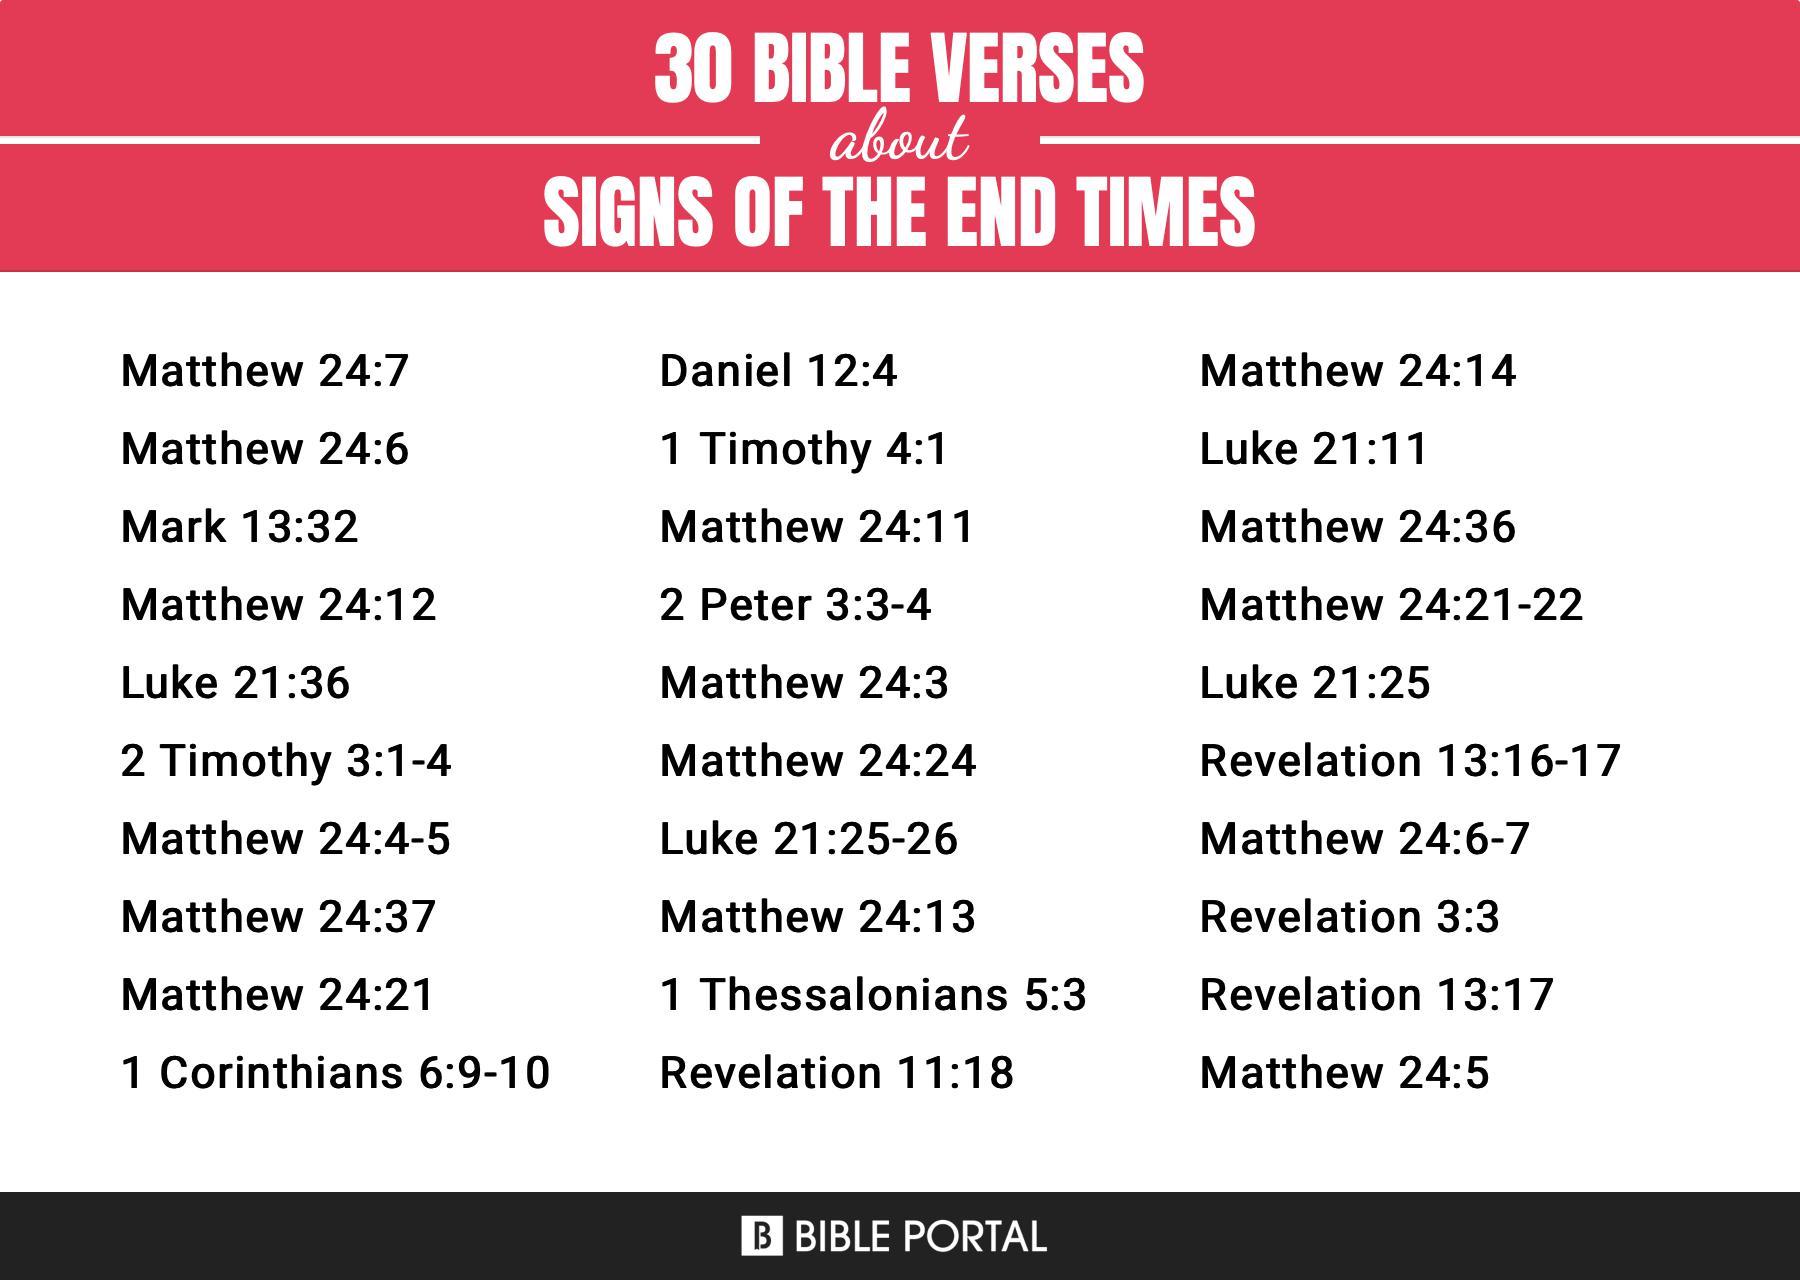 What Does the Bible Say about Signs Of The End Times?